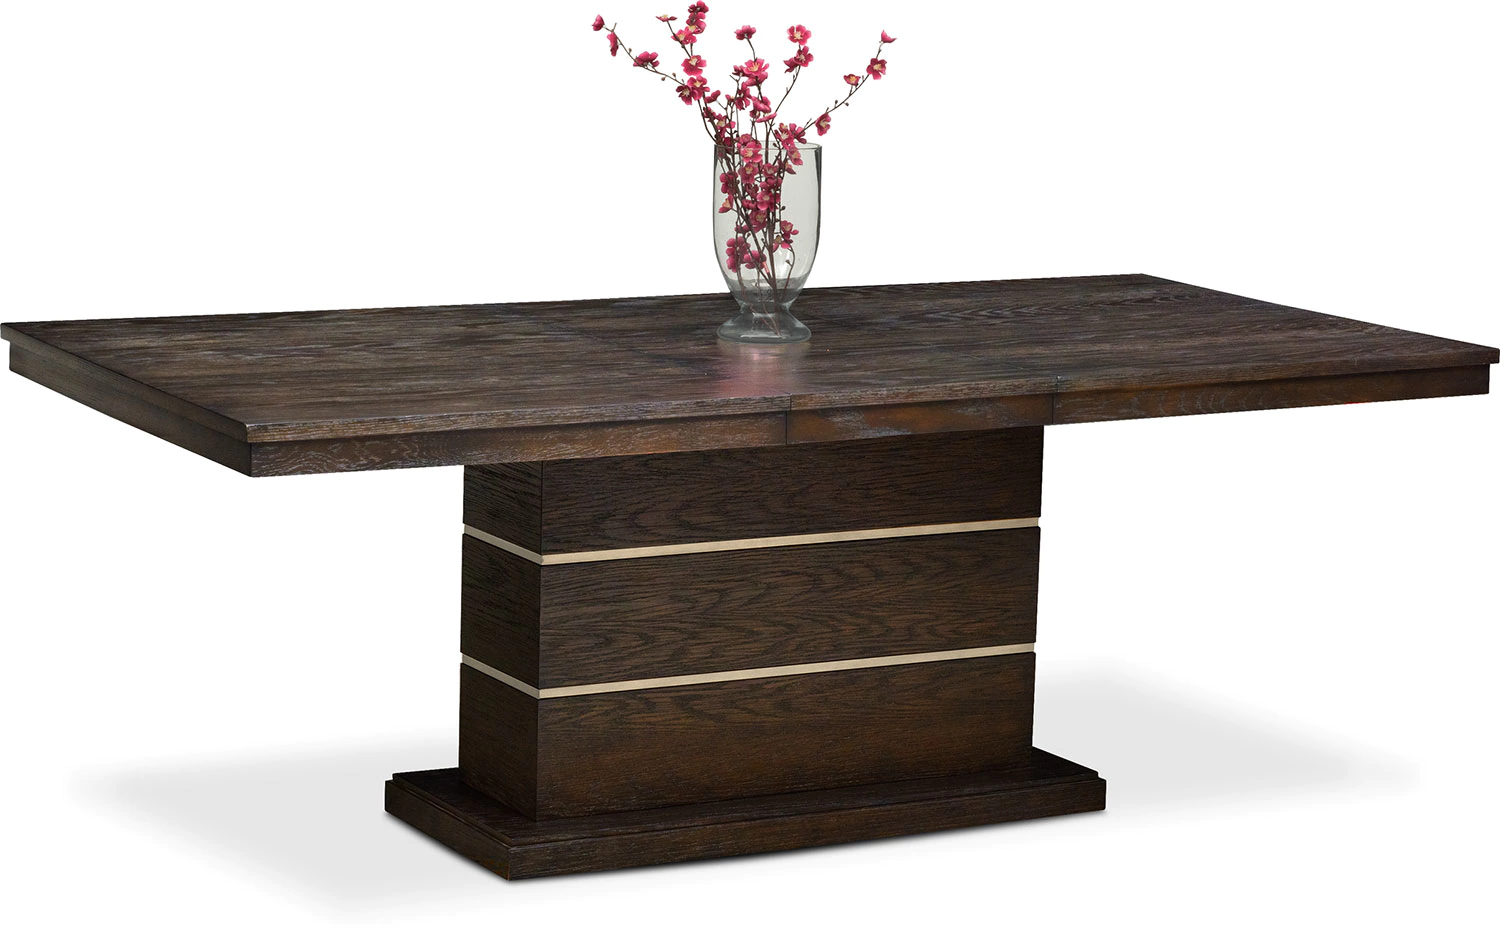 Pedestal table Click to change the image.  CXORAAK